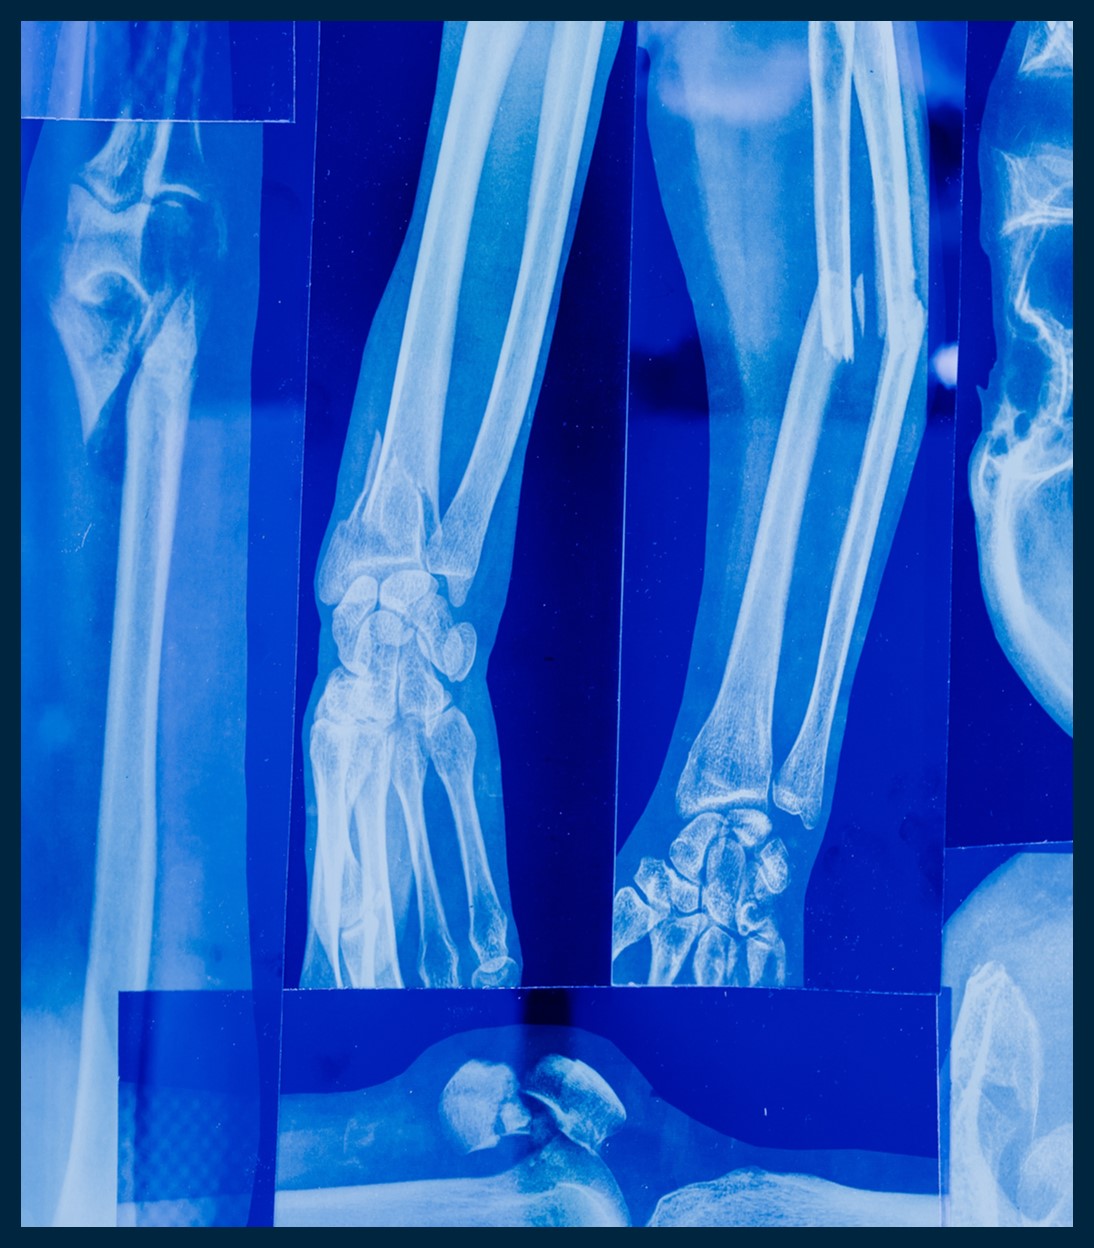 An x-ray images of arms and fractured bones.